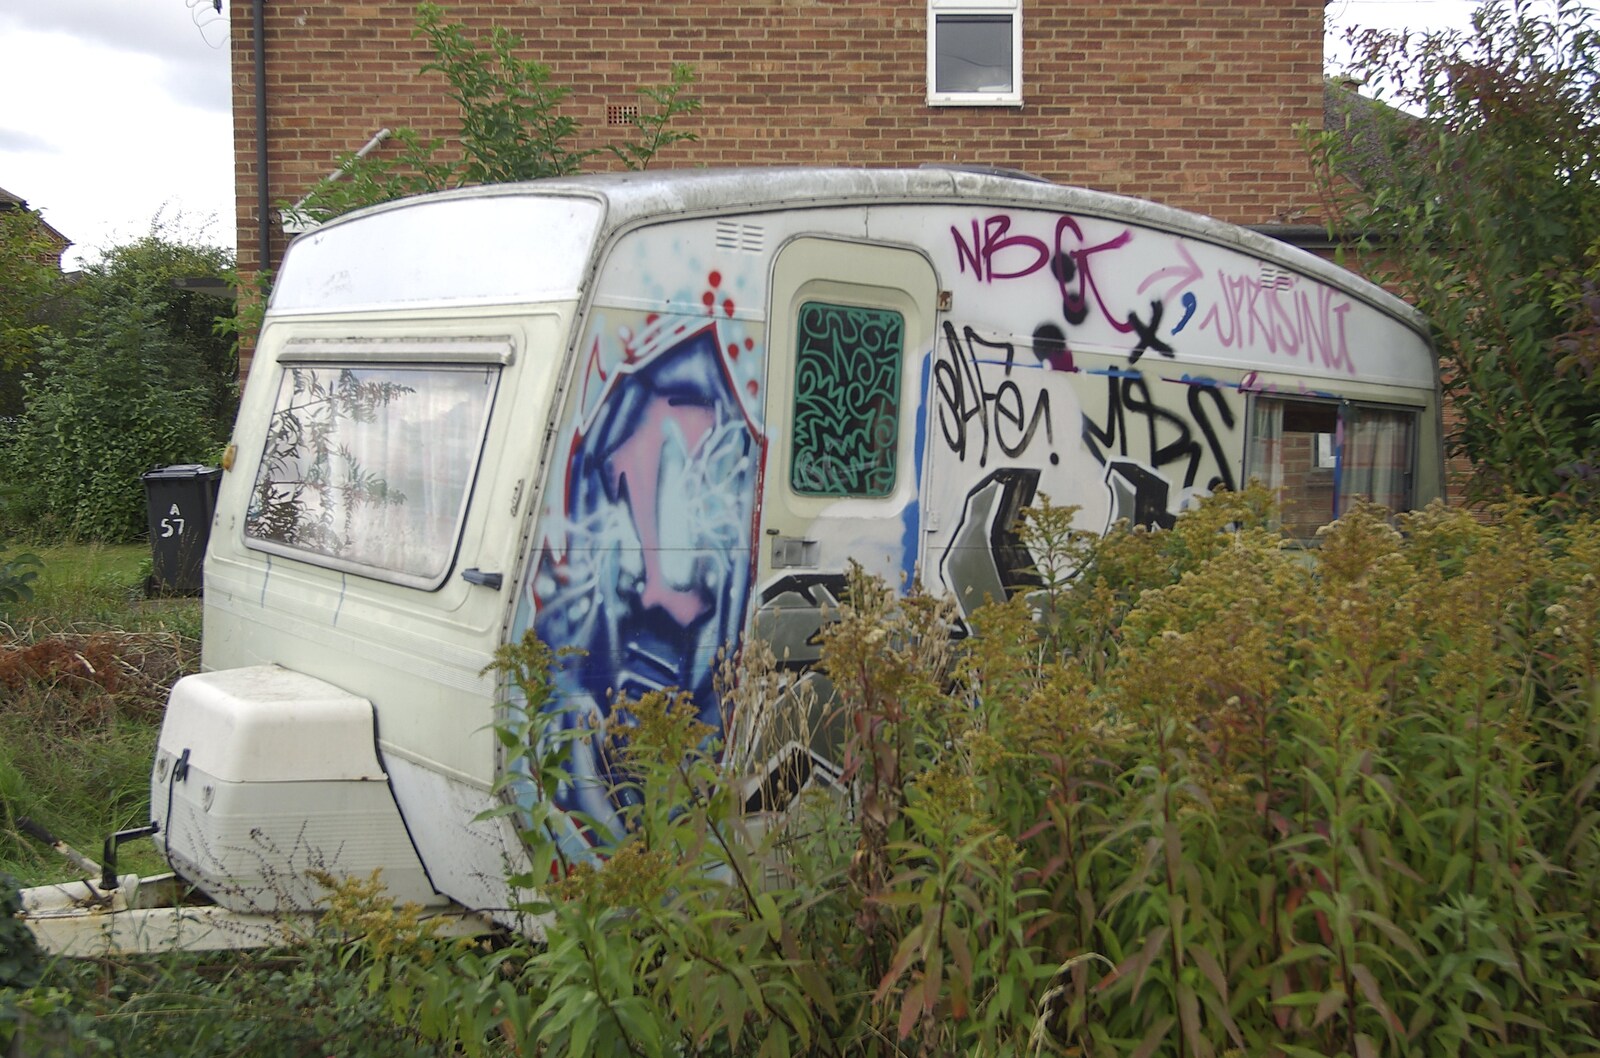 Fred's Further Adventures, Ward Road, Cambridge - 10th October 2008: A derelict caravan on the end of Ward Road